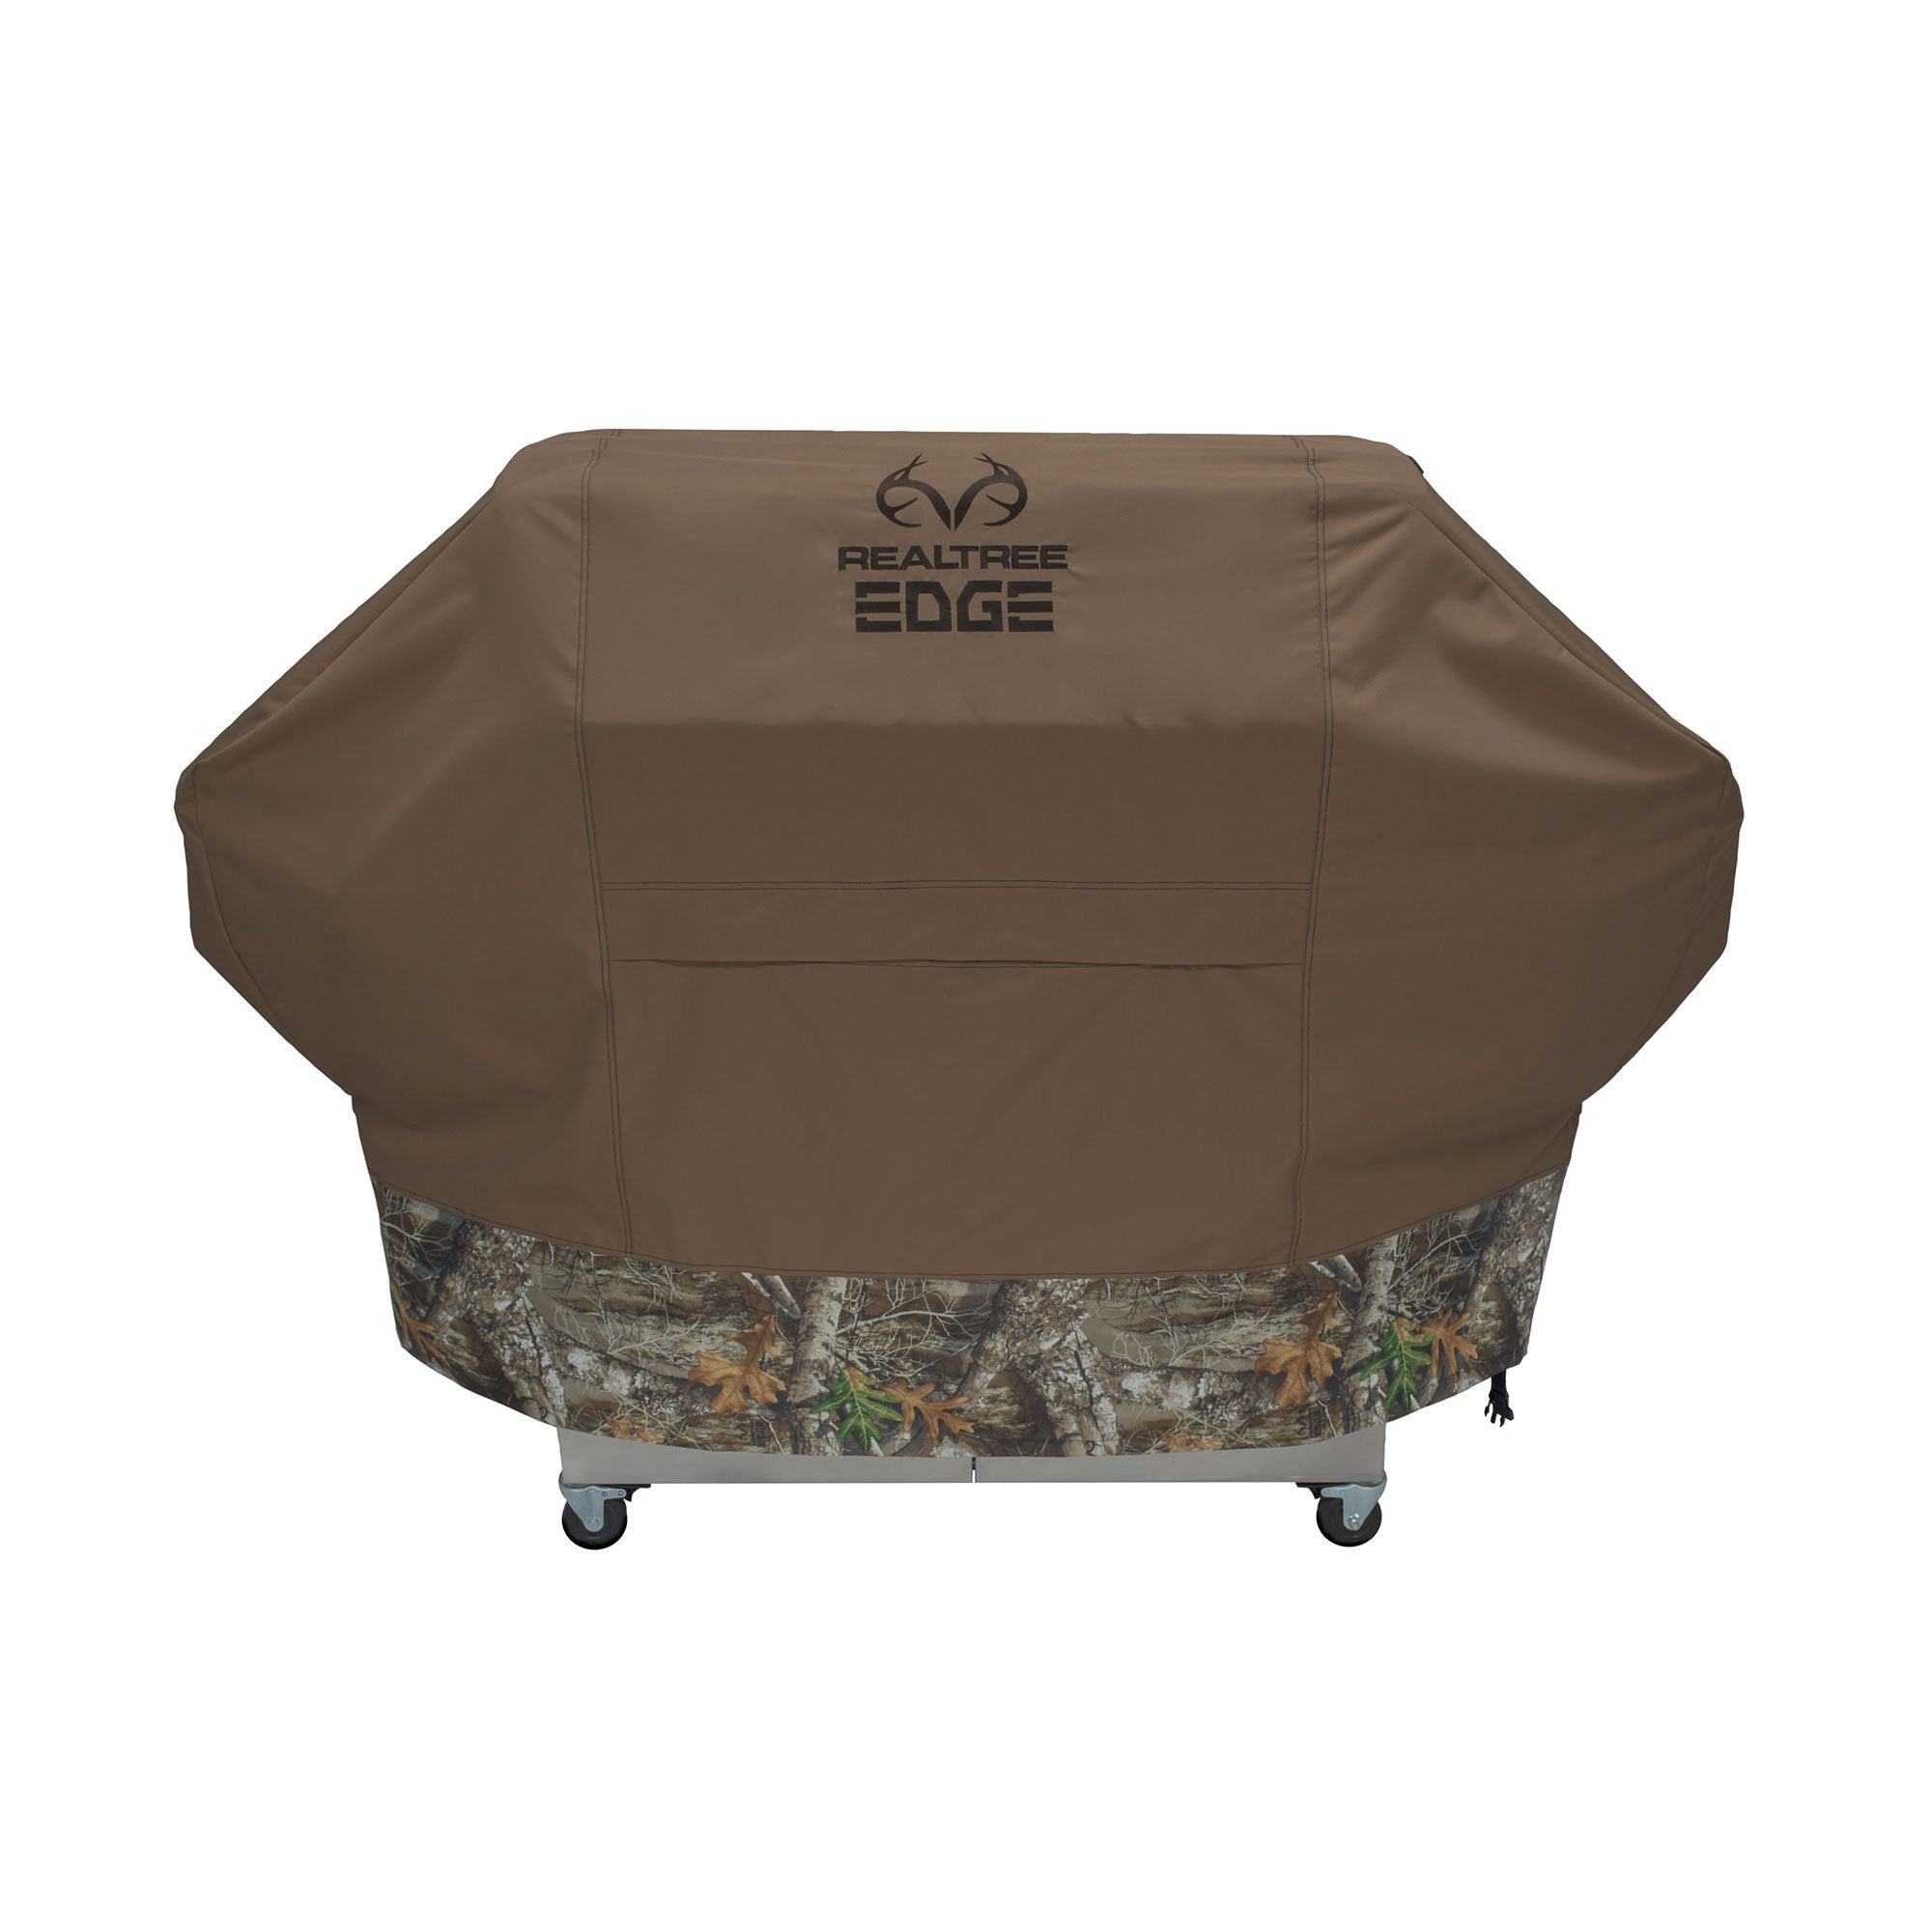 RealTree Edge Grill Cover Extra Large, Camo, 72x25x47 Inches